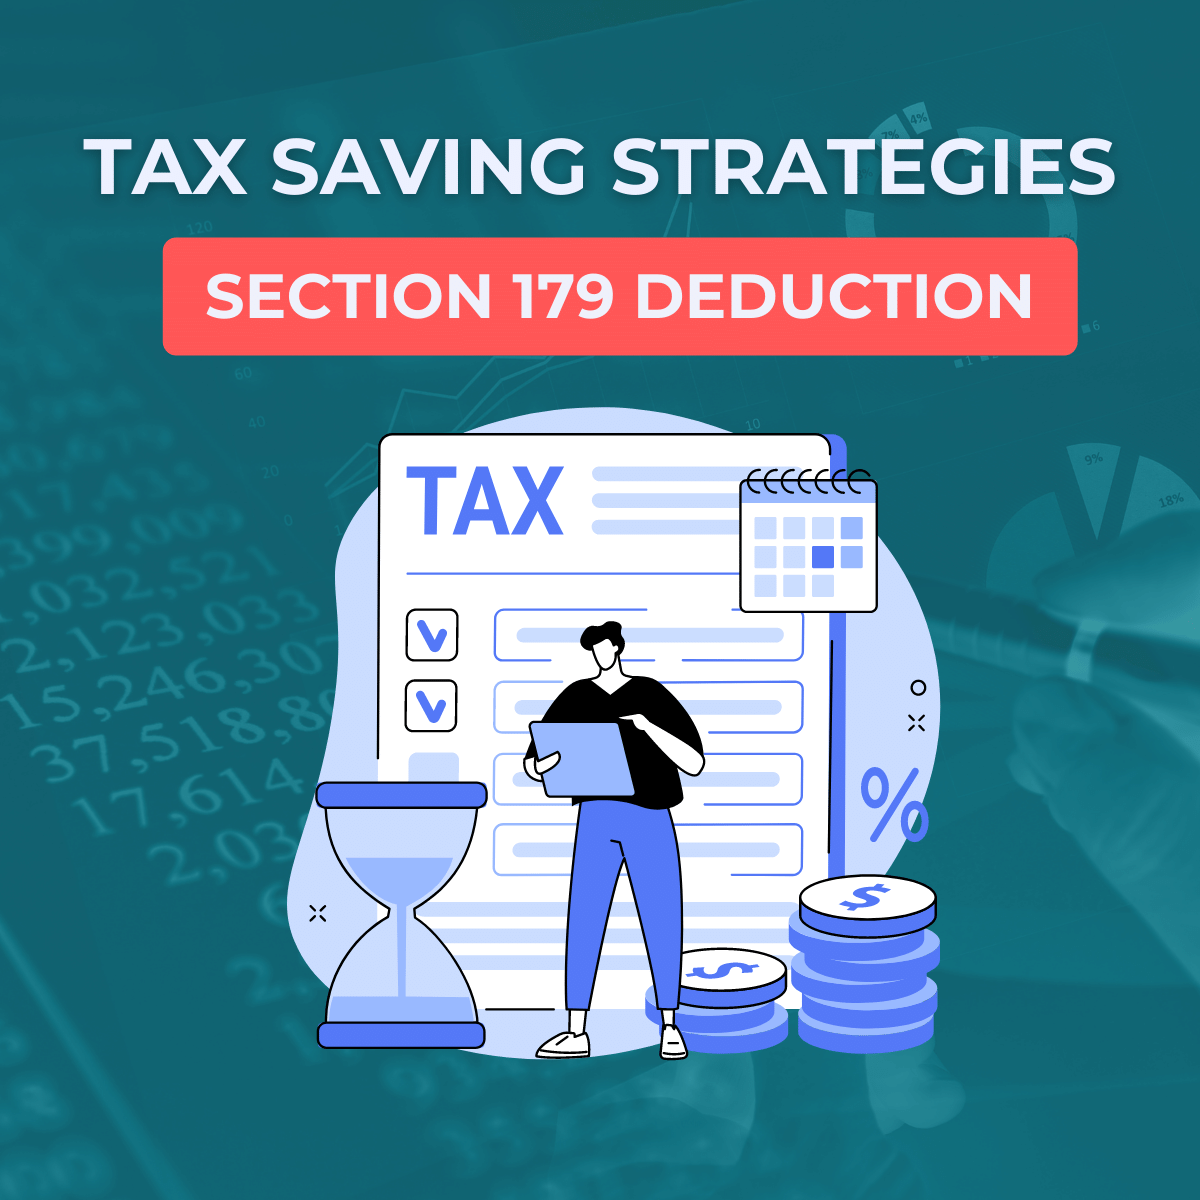 OPPORTUNITIES FOR YEAR-END TAX-SAVING STRATEGIES WITH SECTION 179 DEDUCTION